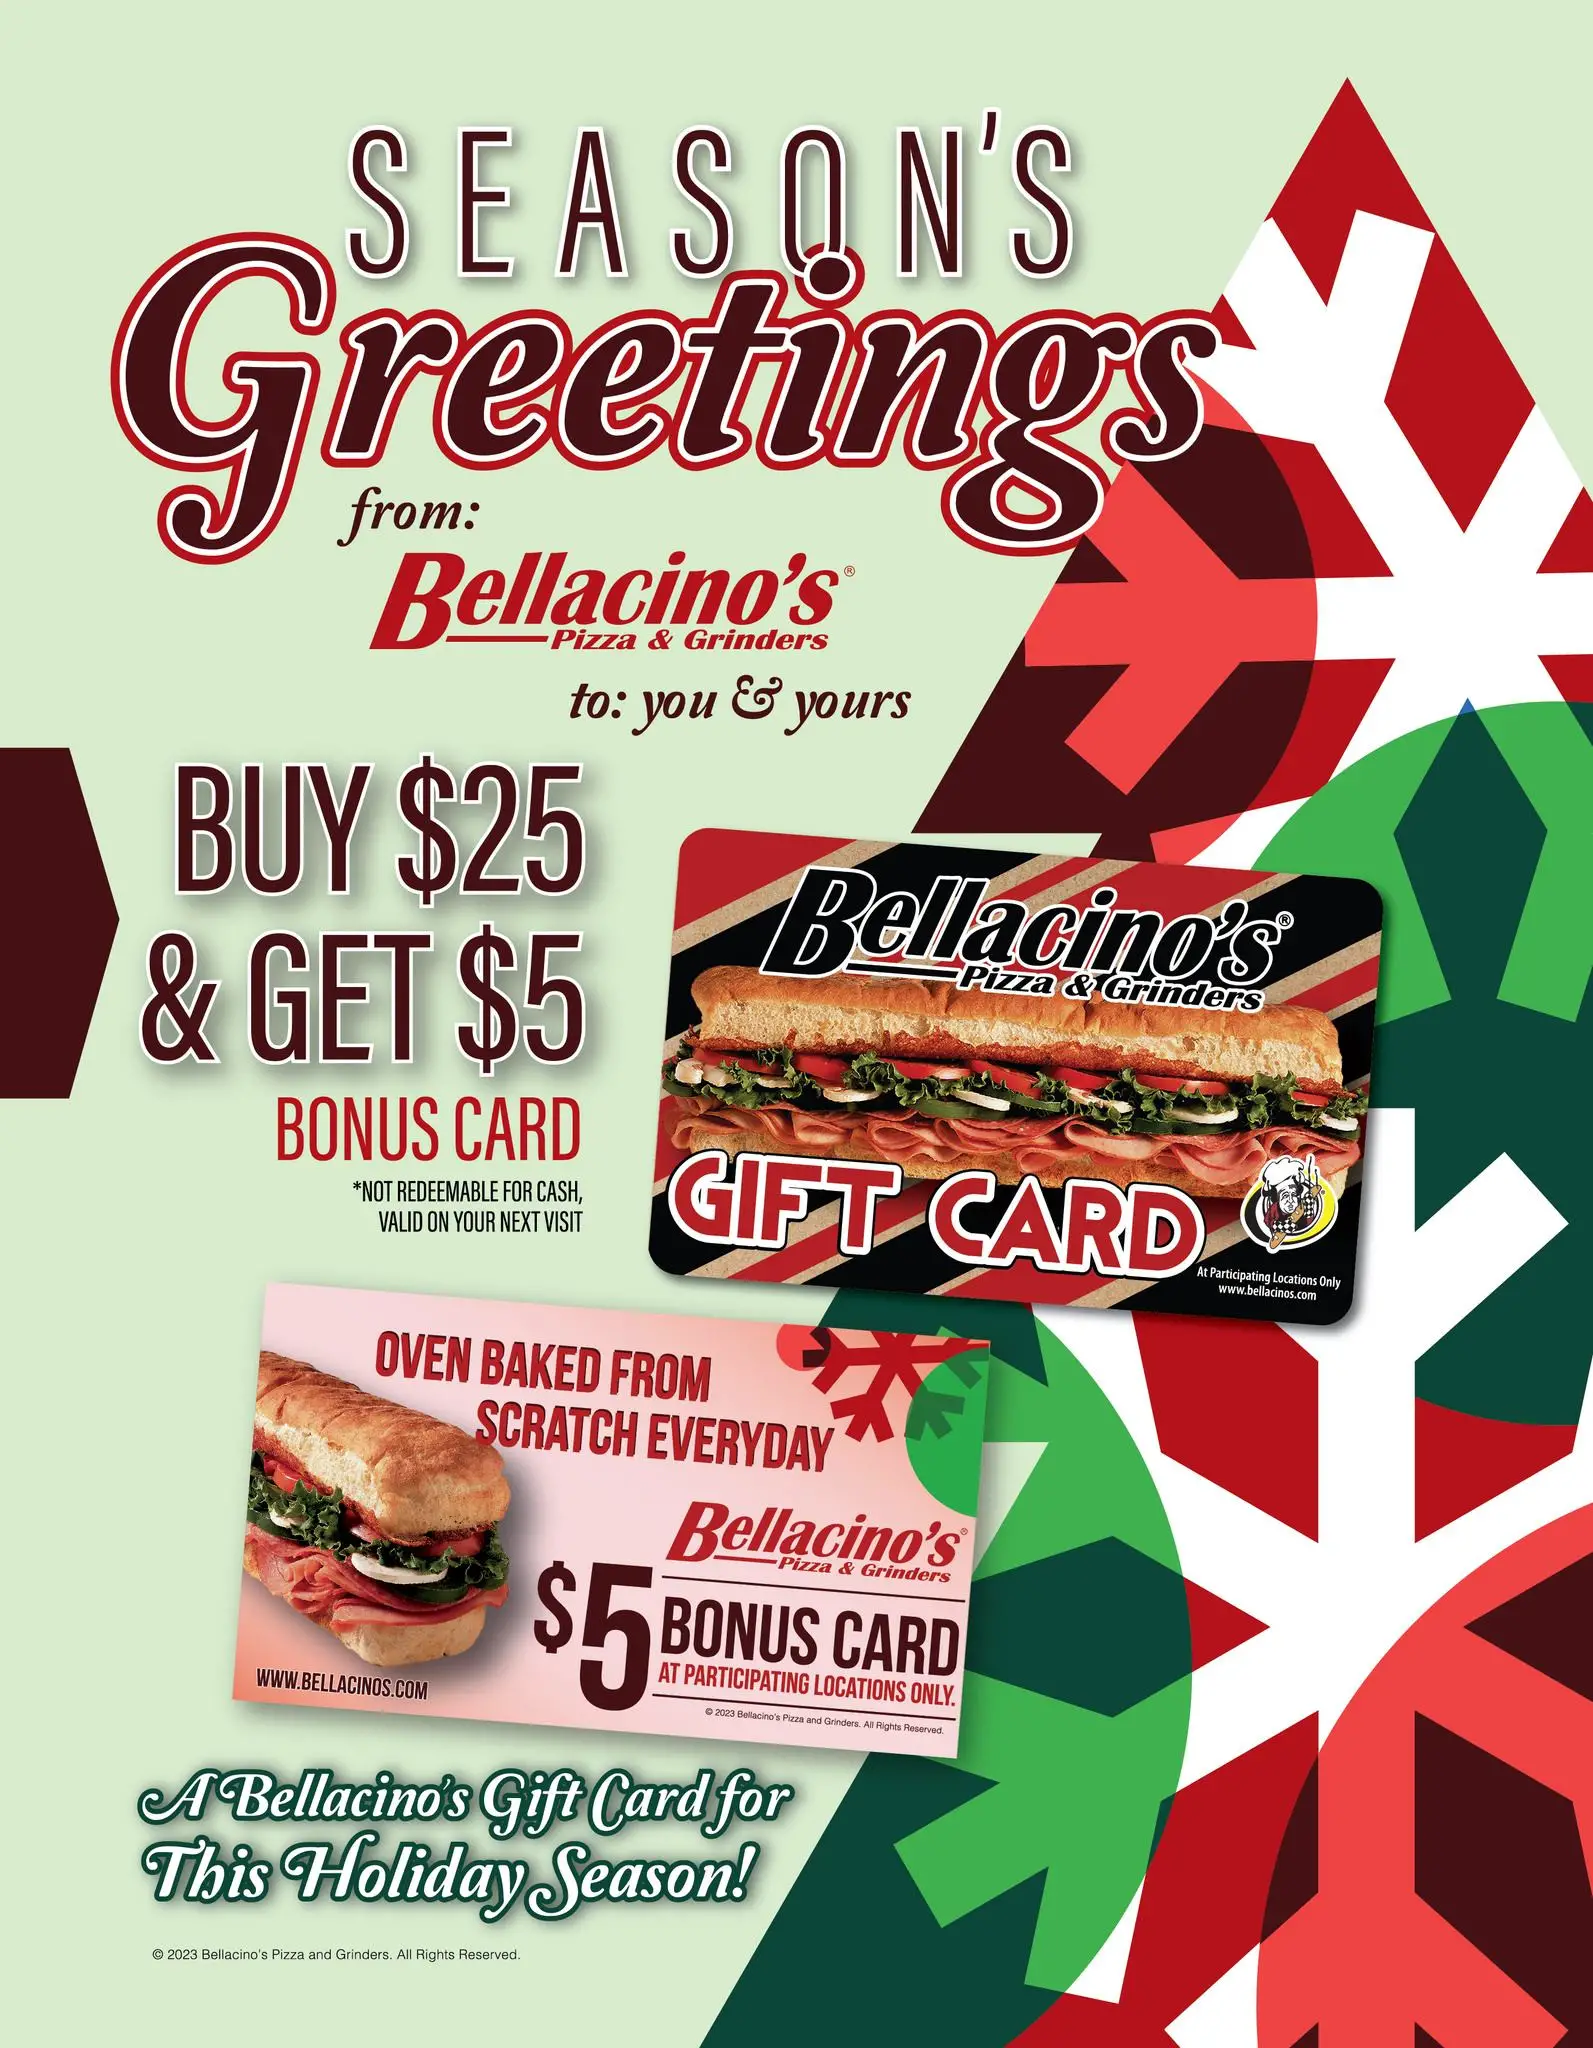 Bellacino's Pizza and Grinders Christmas Free $5 Bonus Card with each $25 Gift Card Purchase